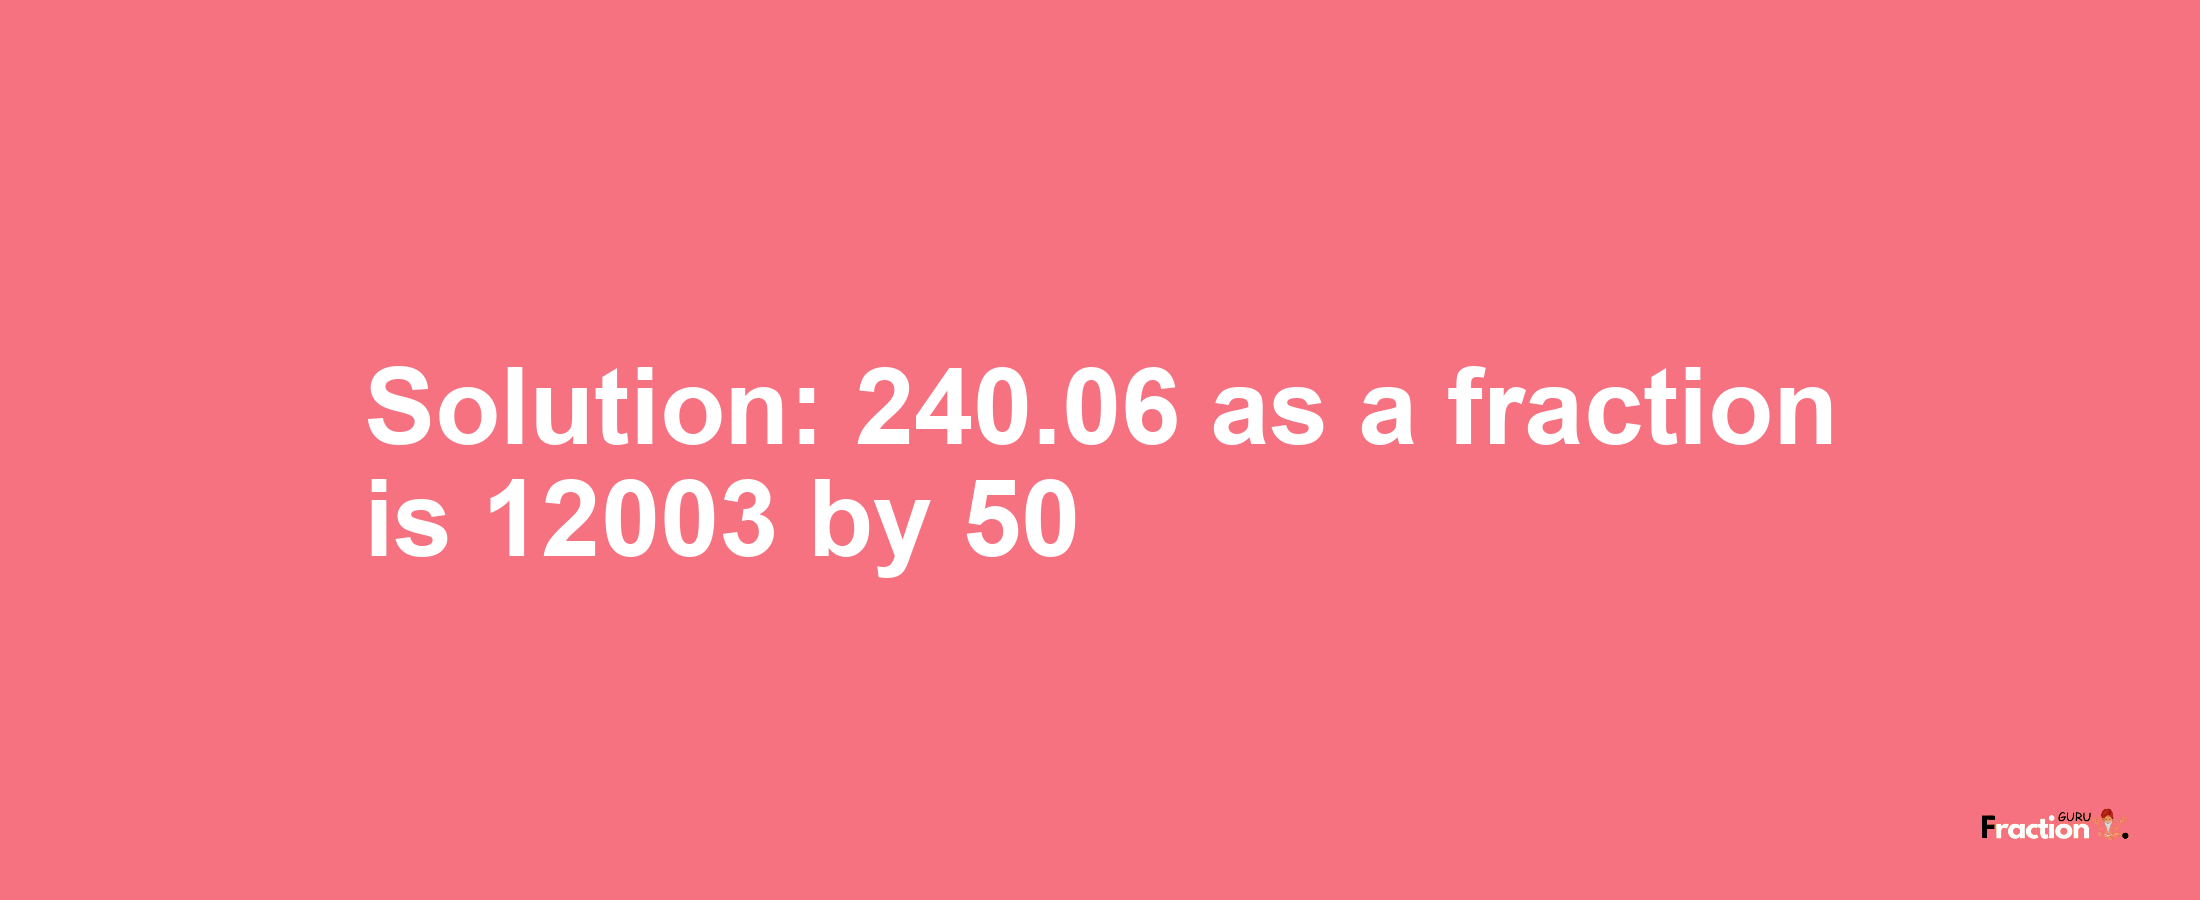 Solution:240.06 as a fraction is 12003/50